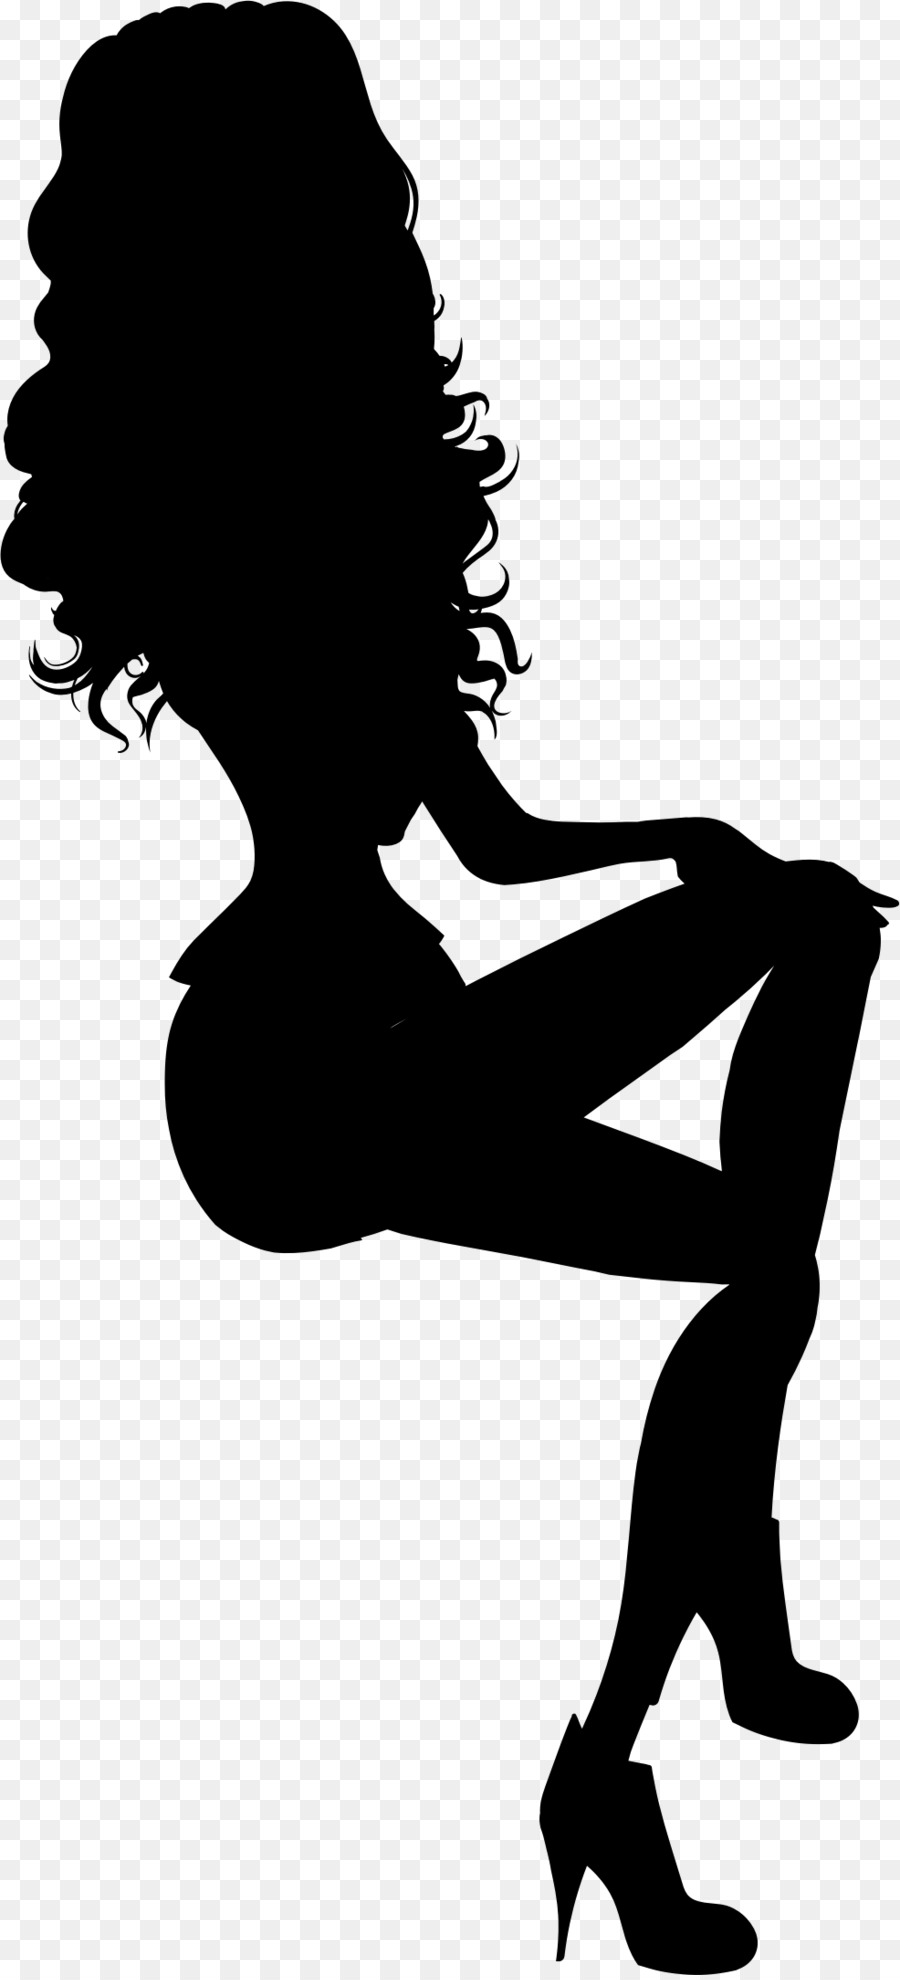 Woman Silhouette Sitting Clip art - woman silhouette png download - 986*2164 - Free Transparent  png Download.